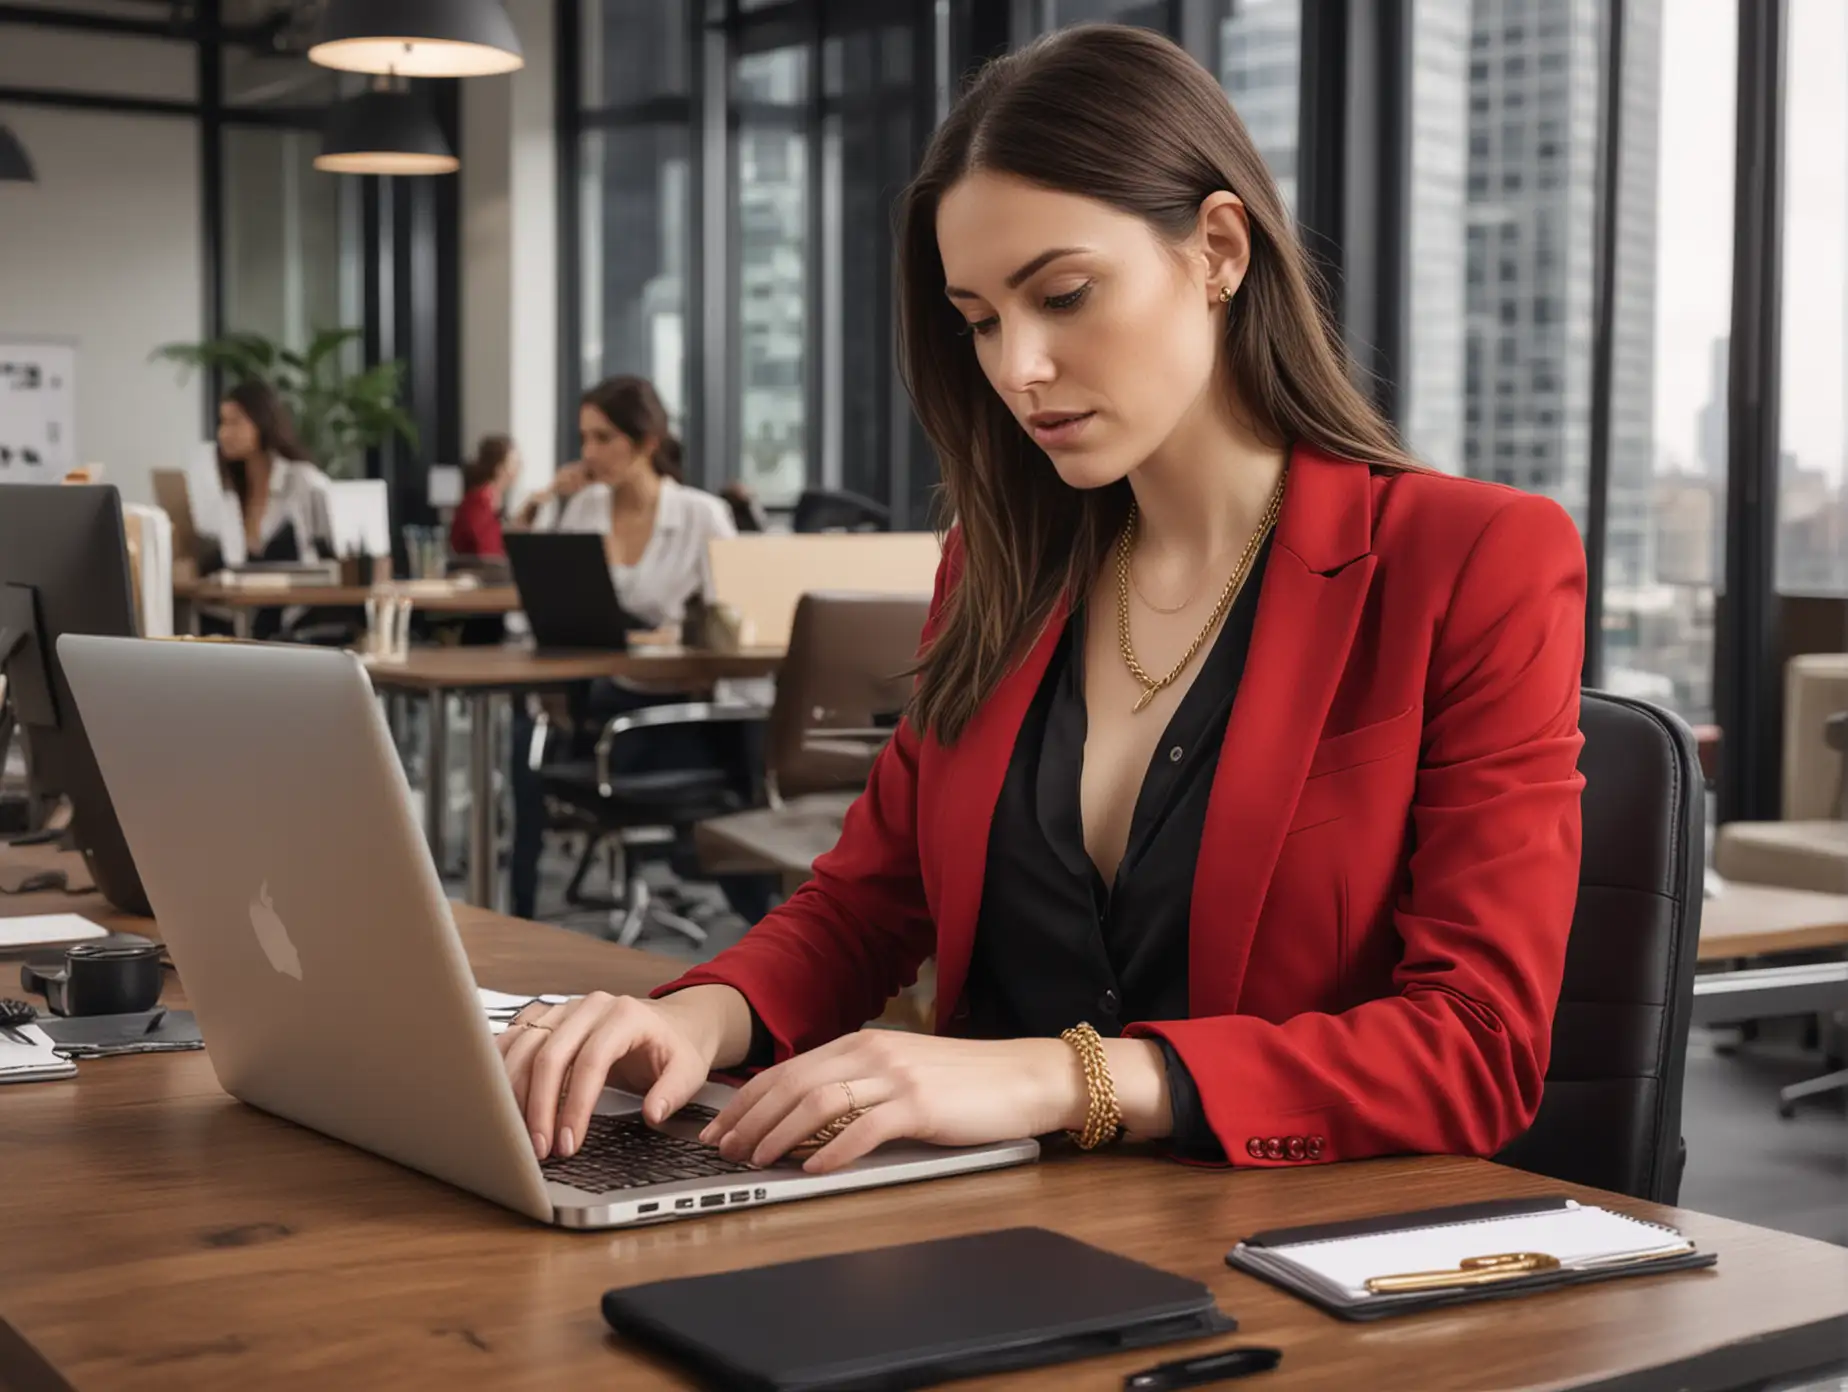 Focused Businesswoman Typing at Busy Urban Office Desk